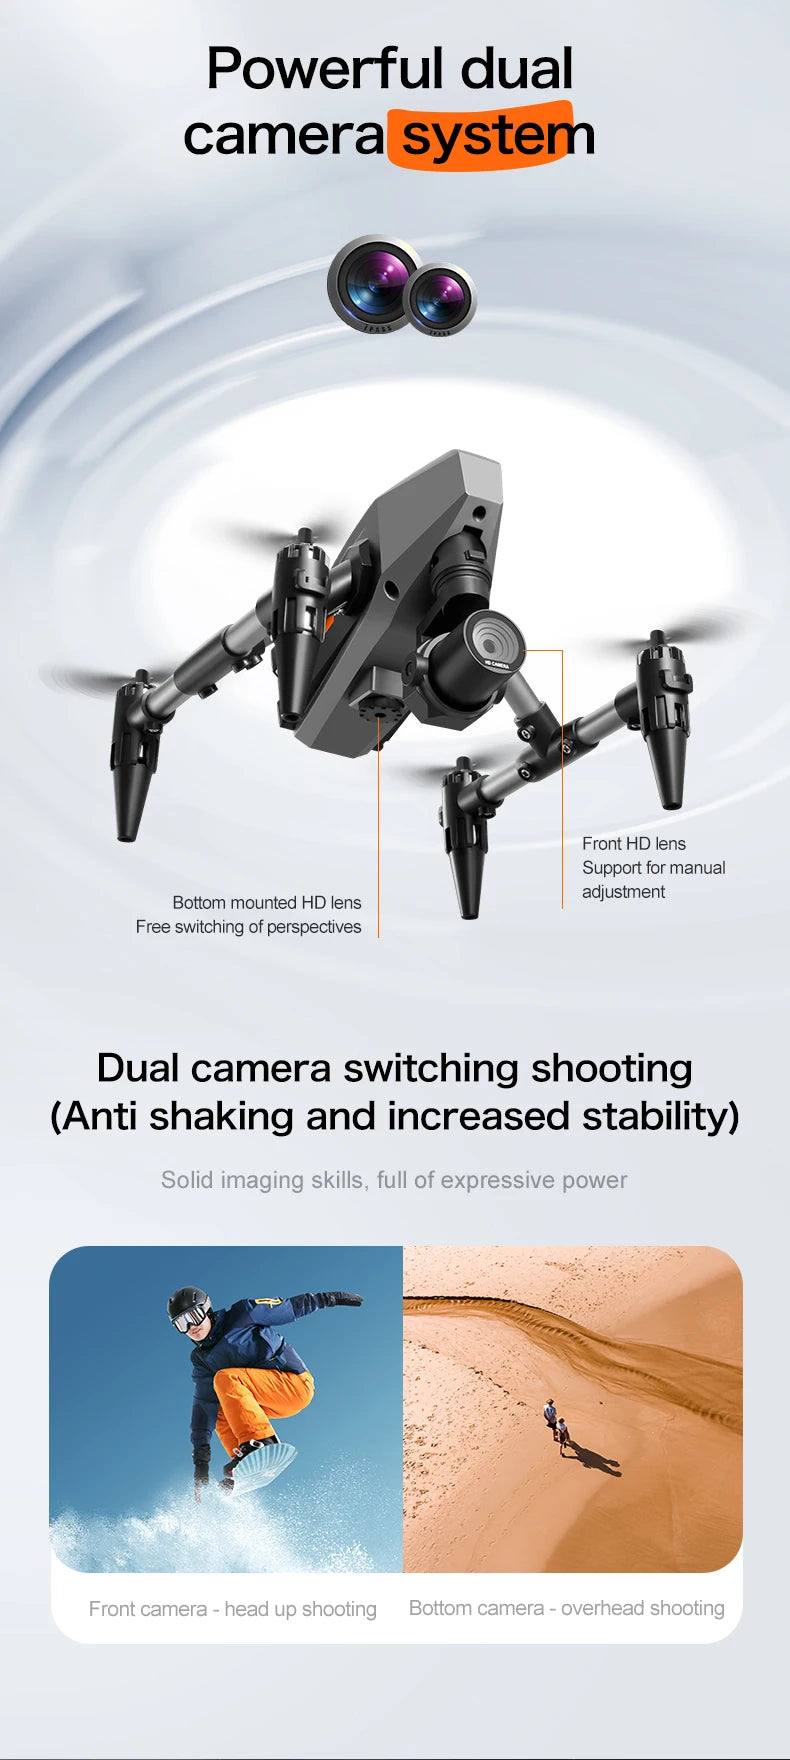 XD1 Mini Drone, powerful dual camera system Front HD lens Support for manual Bottom mounted HD lens adjustment Free switching of perspectives